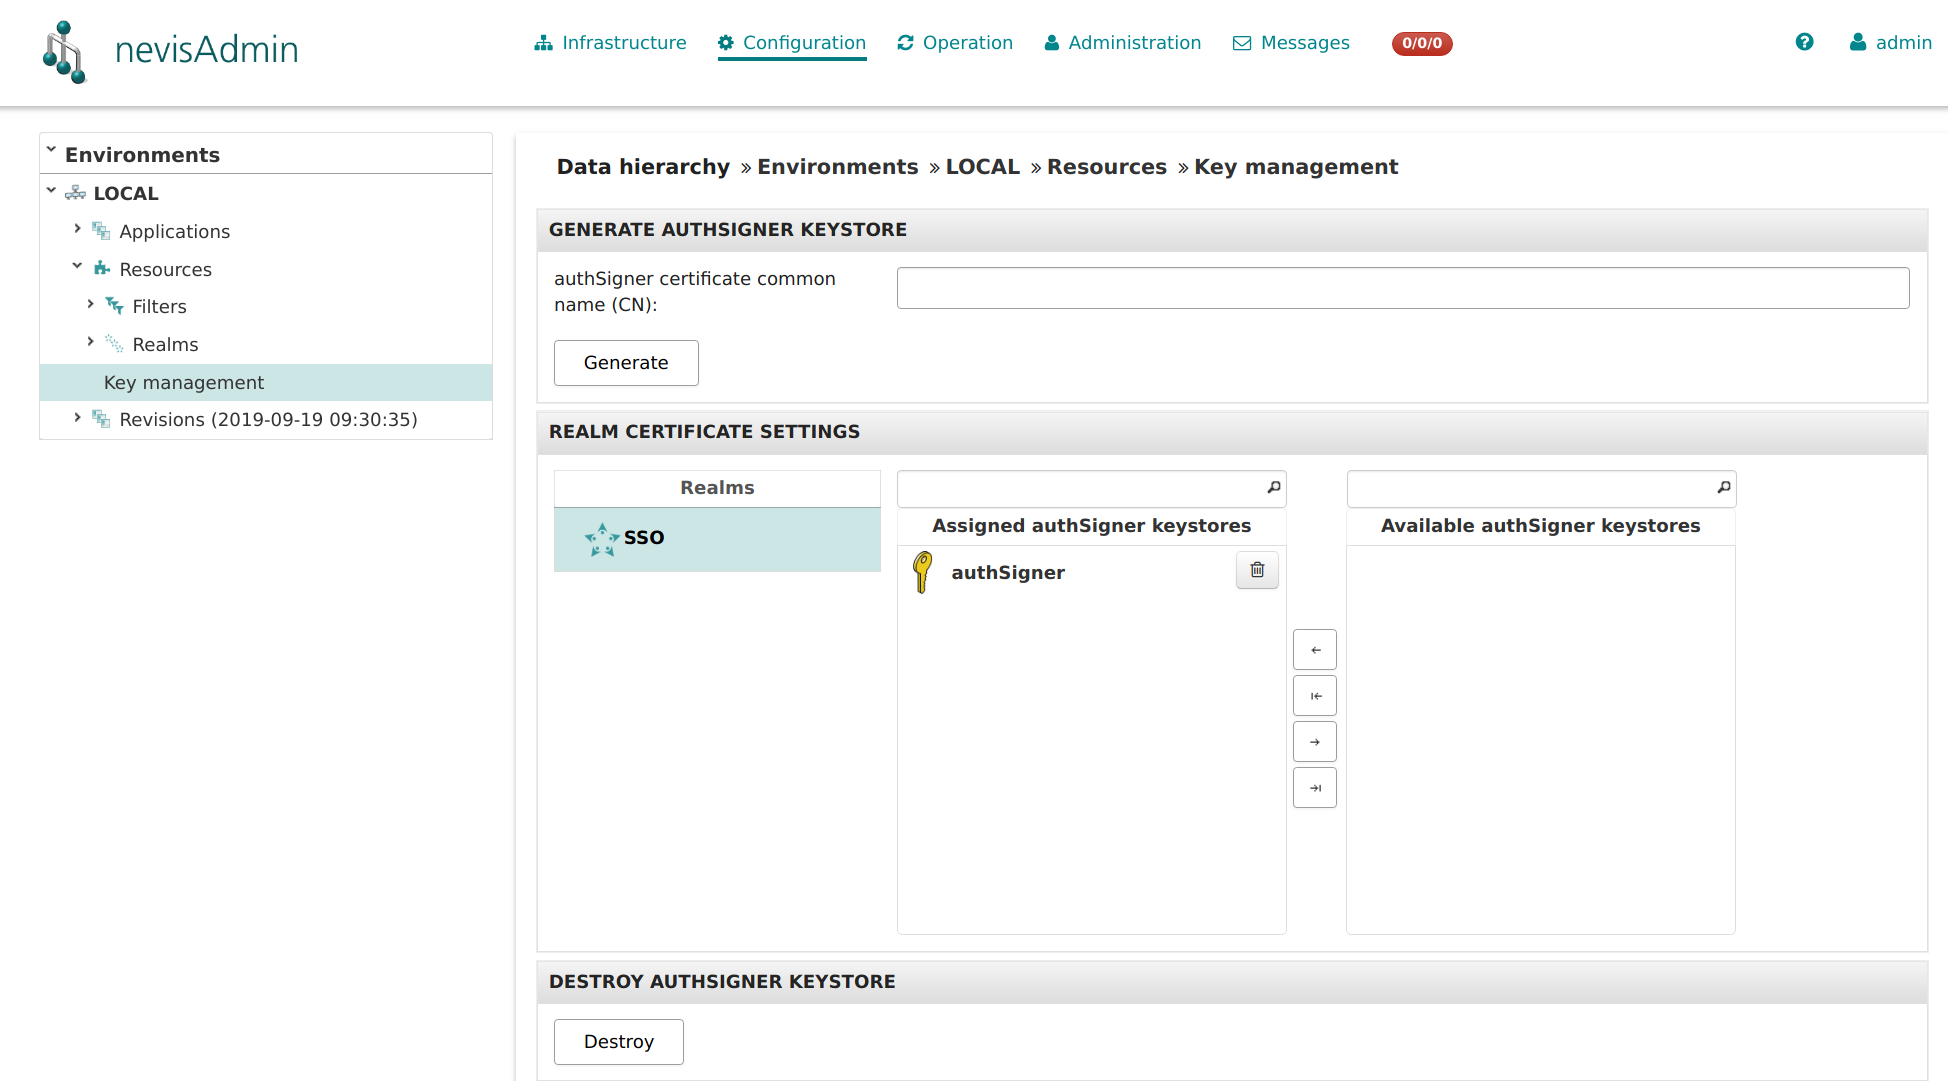 The Key management view in the Configuration tab